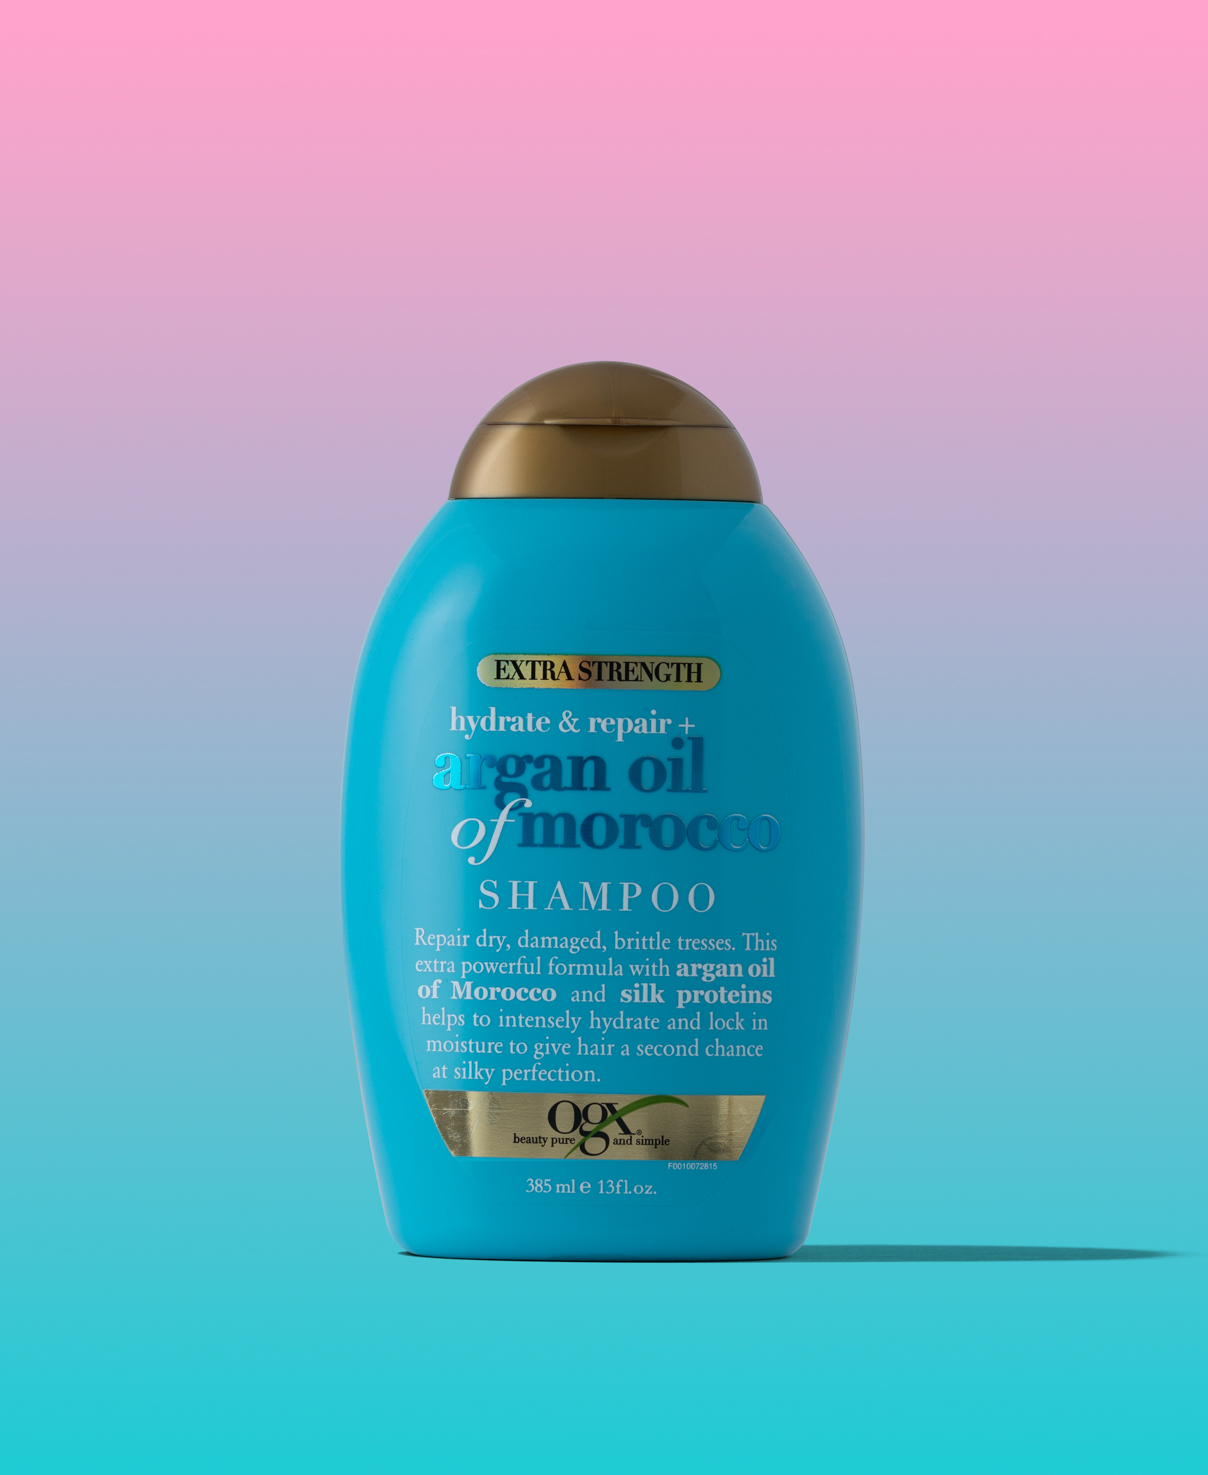 OGX Extra Strength Hydrate & Repair + Argan Oil of Morocco Shampoo for Dry